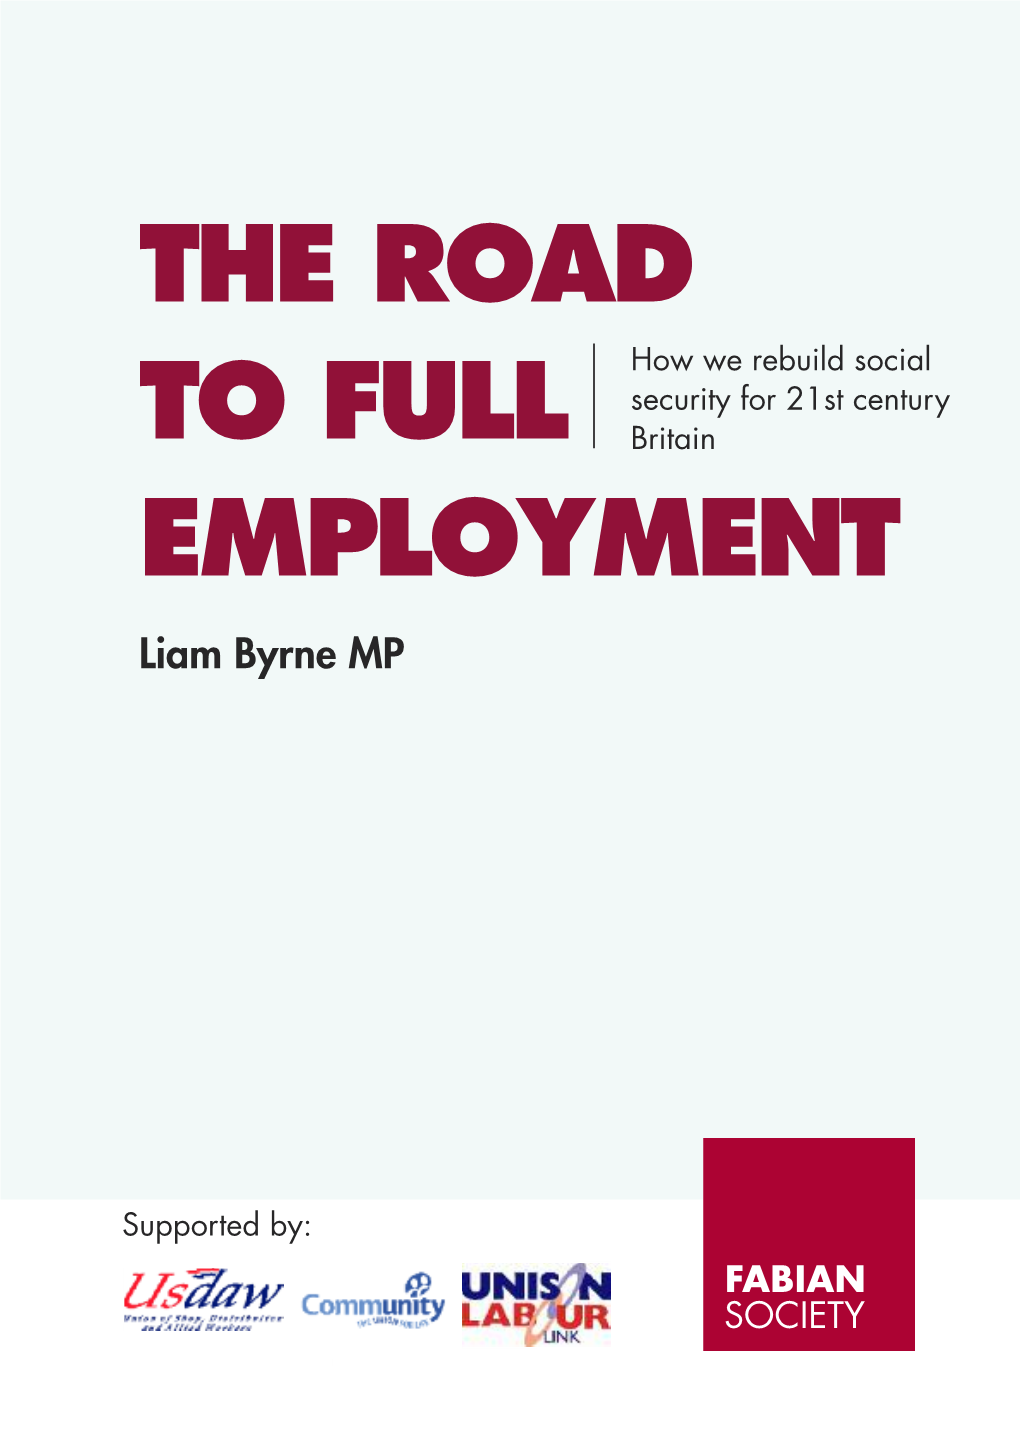 THE ROAD to FULL EMPLOYMENT HOW WE REBUILD SOCIAL SECURITY for 21ST CENTURY BRITAIN Liam Byrne MP the ROAD How We Rebuild Social